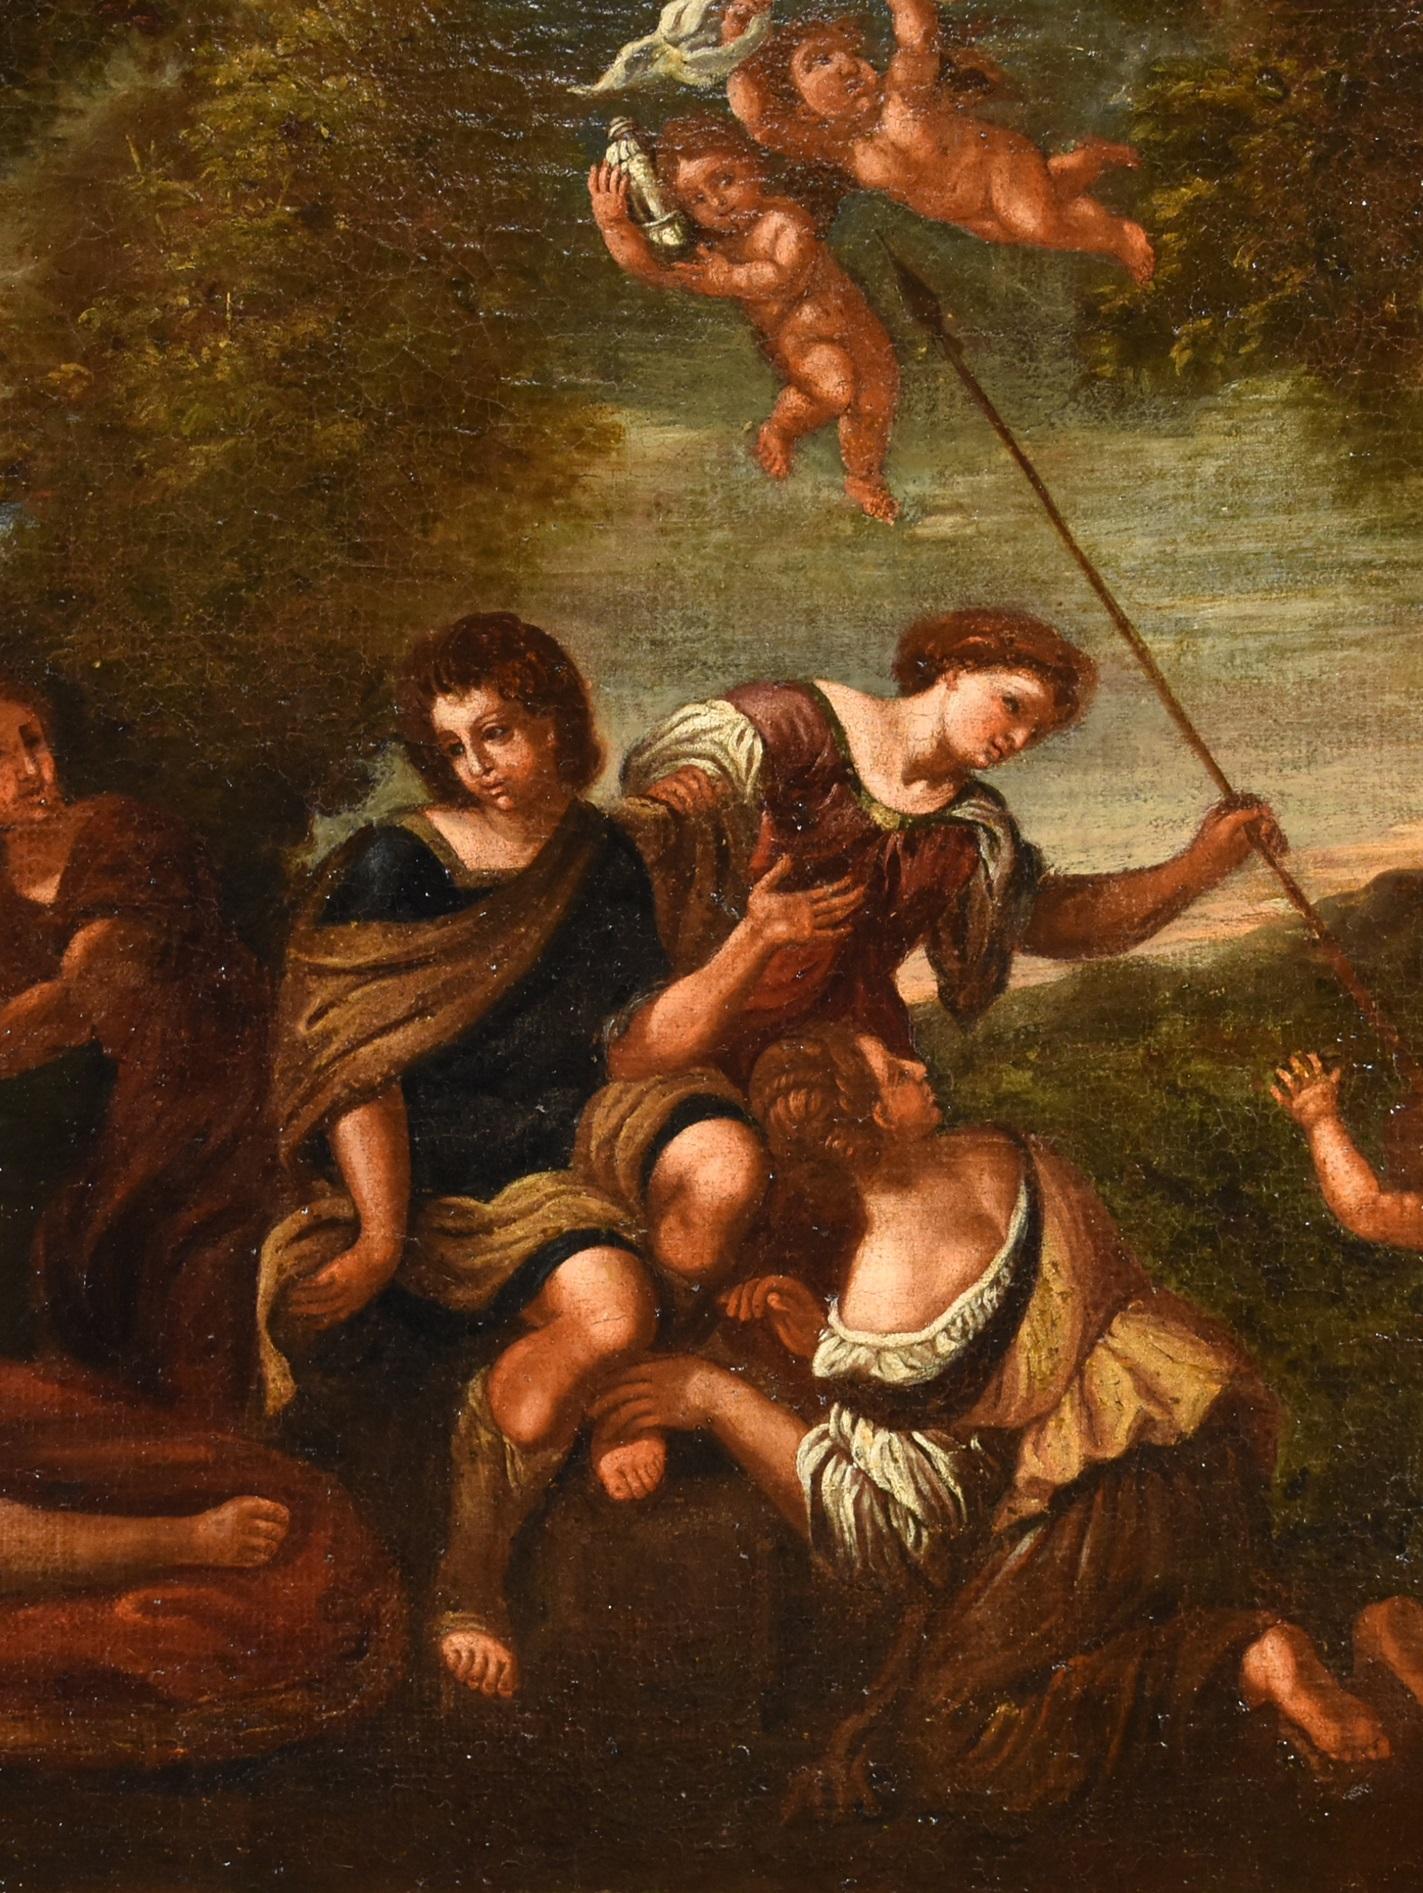 Diana and her nymphs surprised by Actaeon
Francesco Albani (Bologna 1578 - 1660), workshop of

oil on canvas

62 x 75 cm.
framed 72 x 84 cm. (period frame)

The proposed painting, depicting one of the episodes from the myth of Diana and Actaeon, can